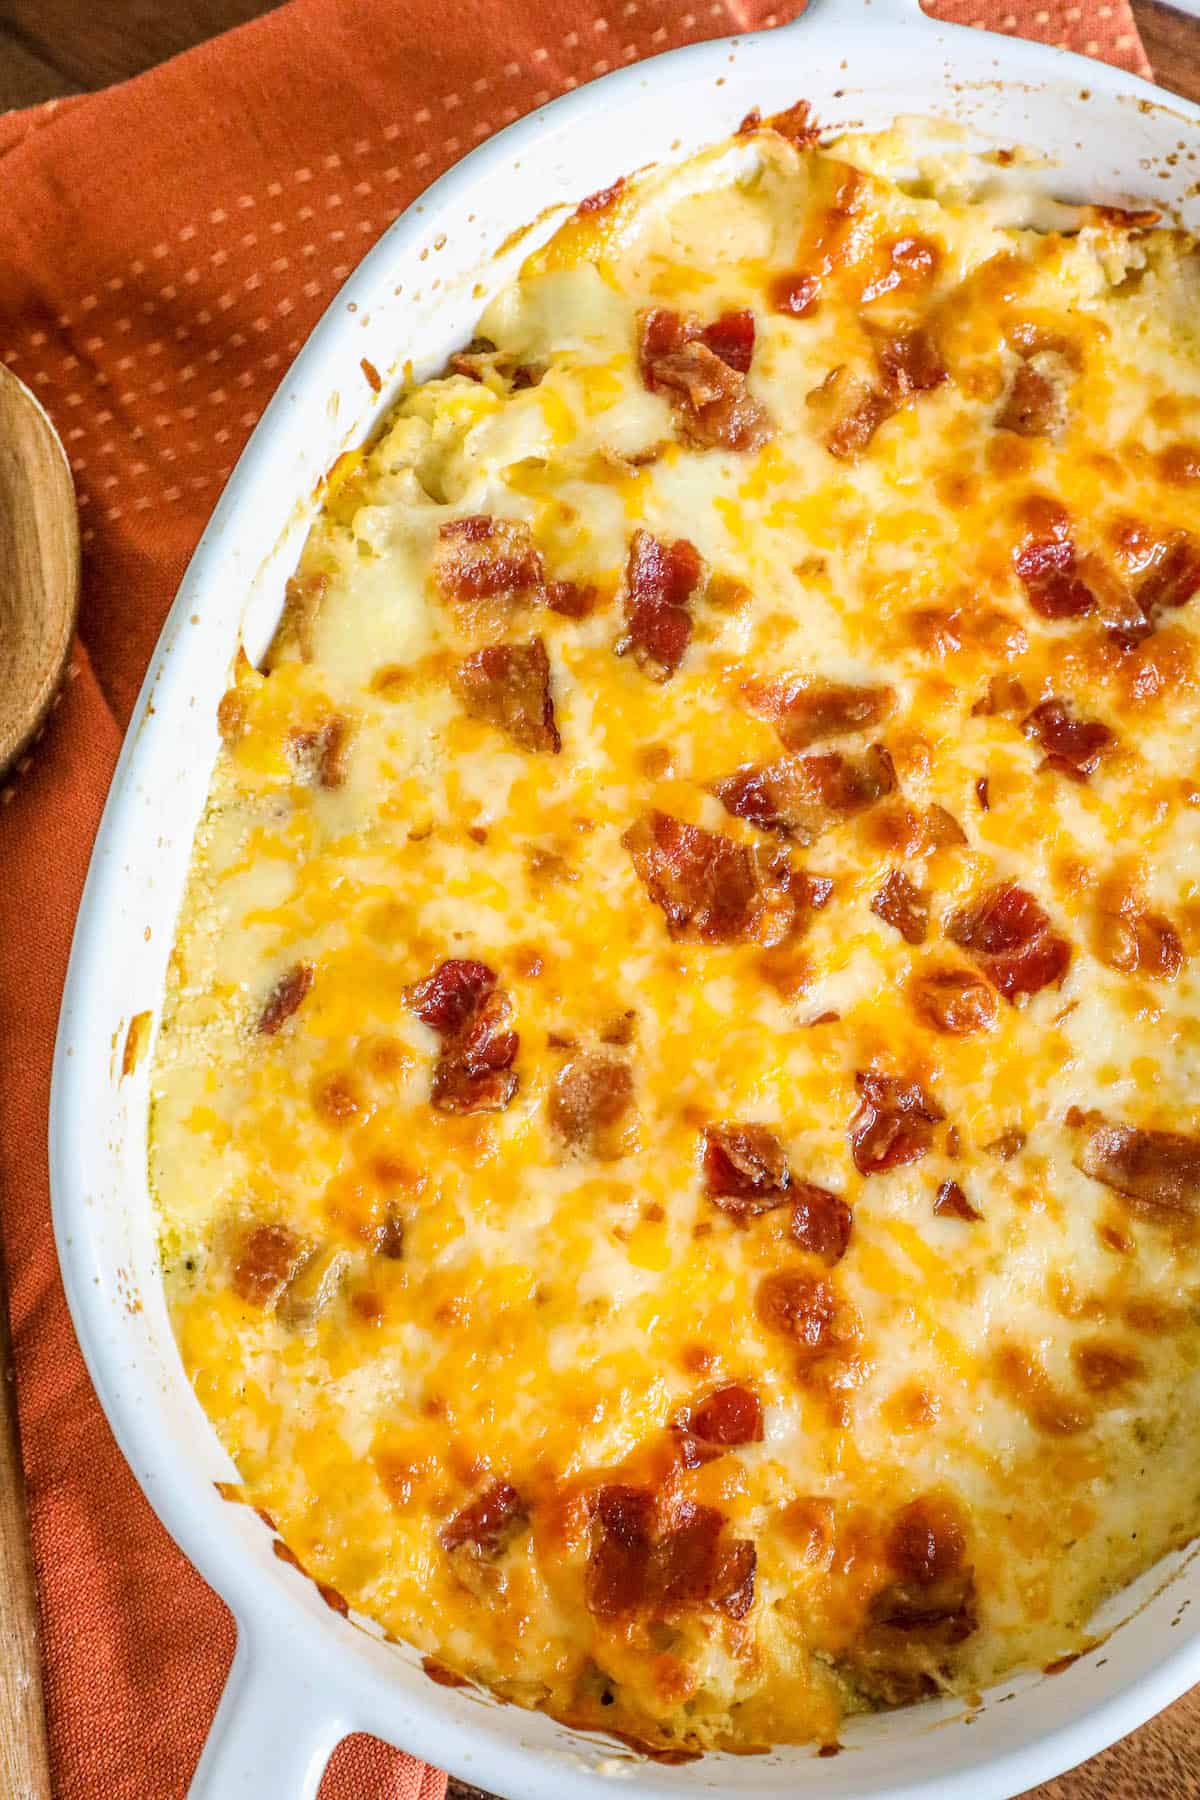 A broccoli and cauliflower casserole with bacon and cheese.